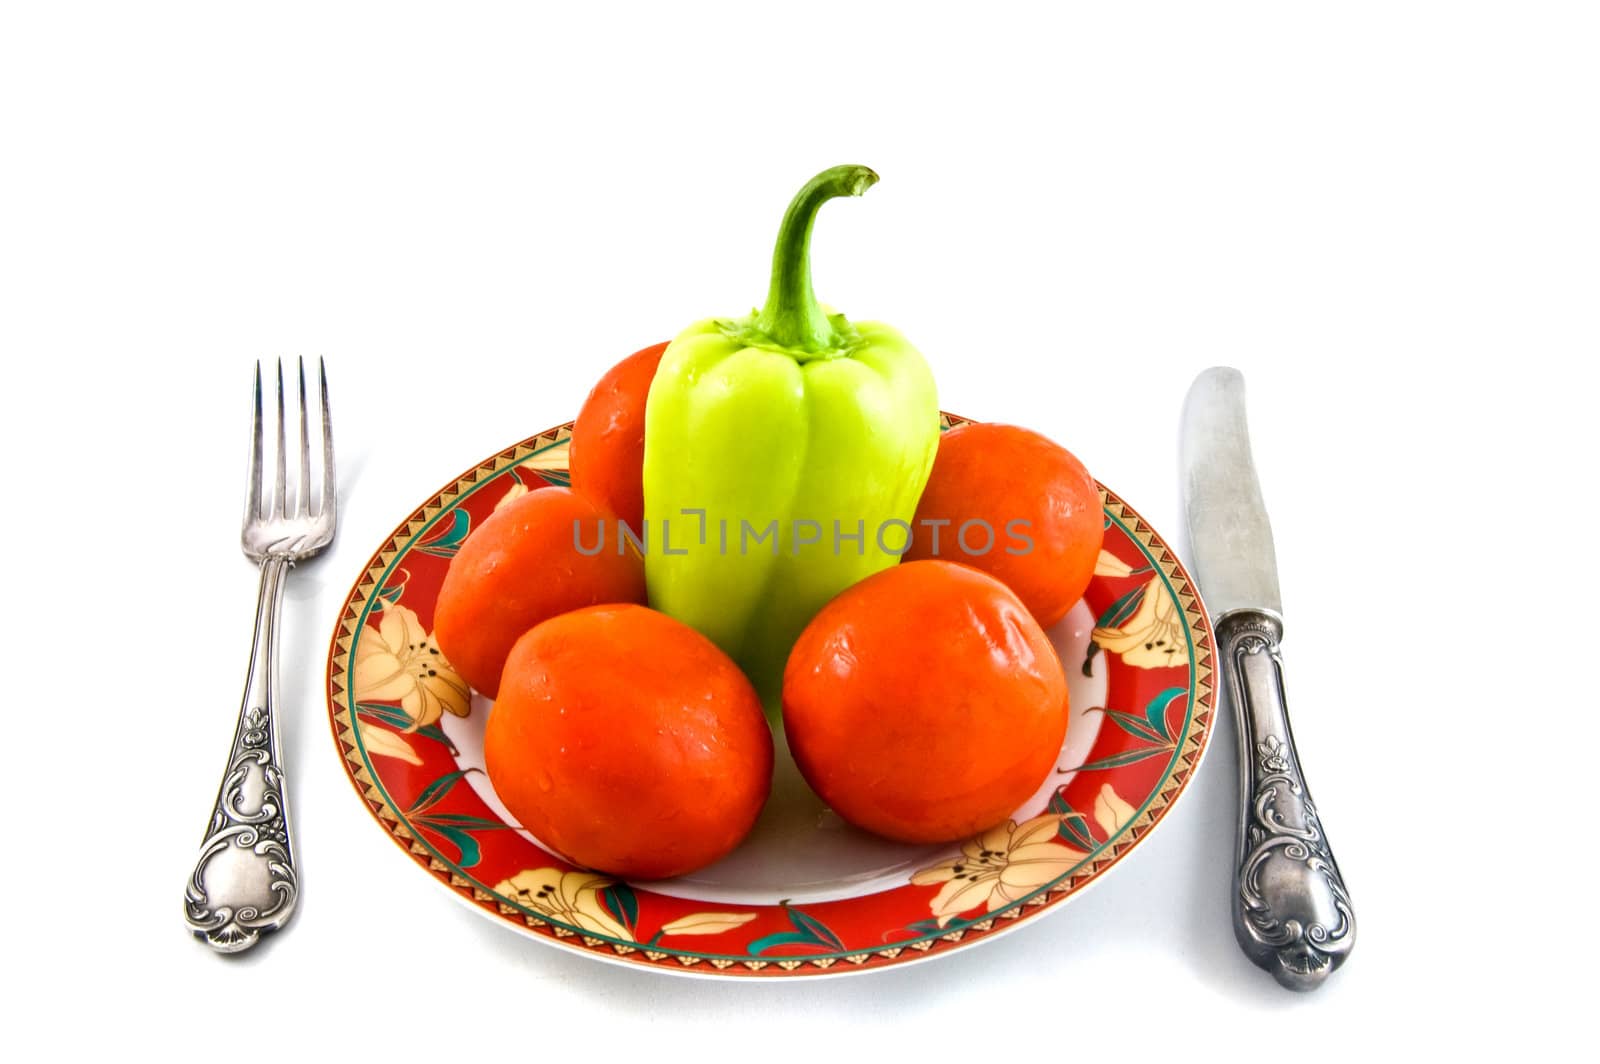 peppers and tomatoes on plate on white bacground